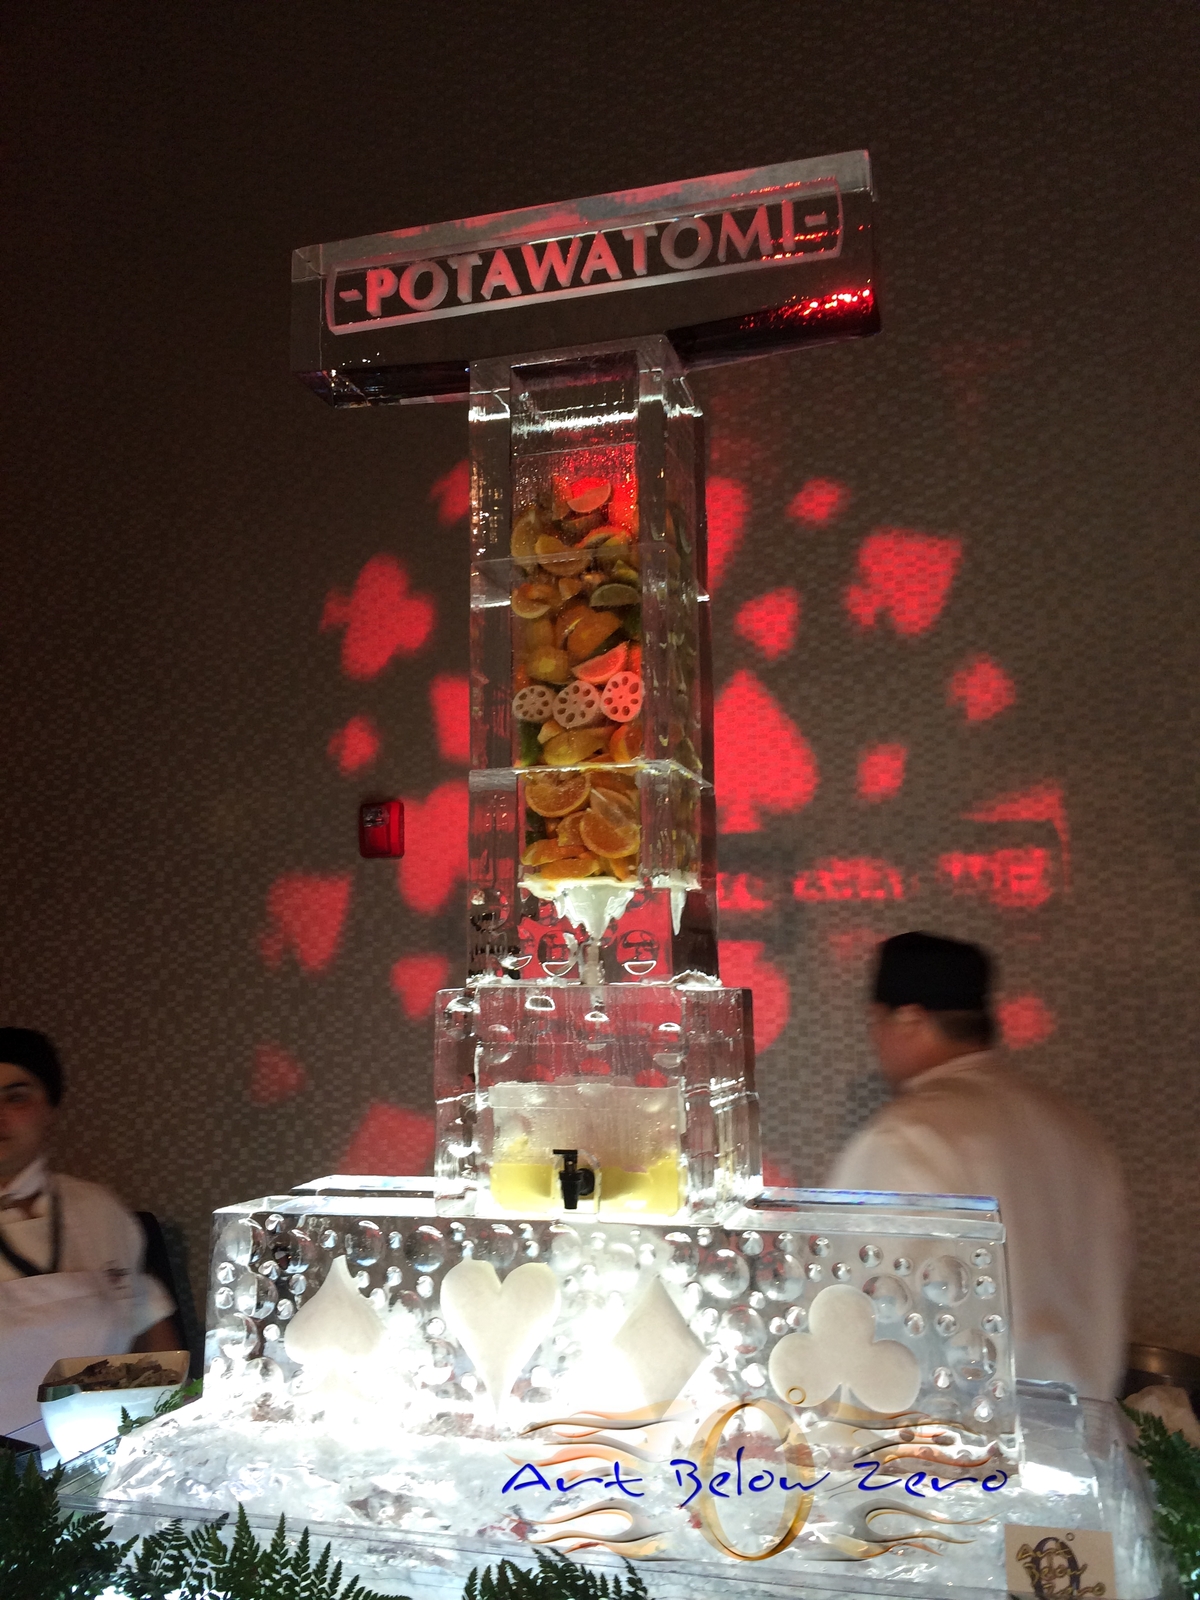 Savory_infuser_ice_sculpture_at_the_grand_opening_of_the_hotel_at_potawatomi_casino